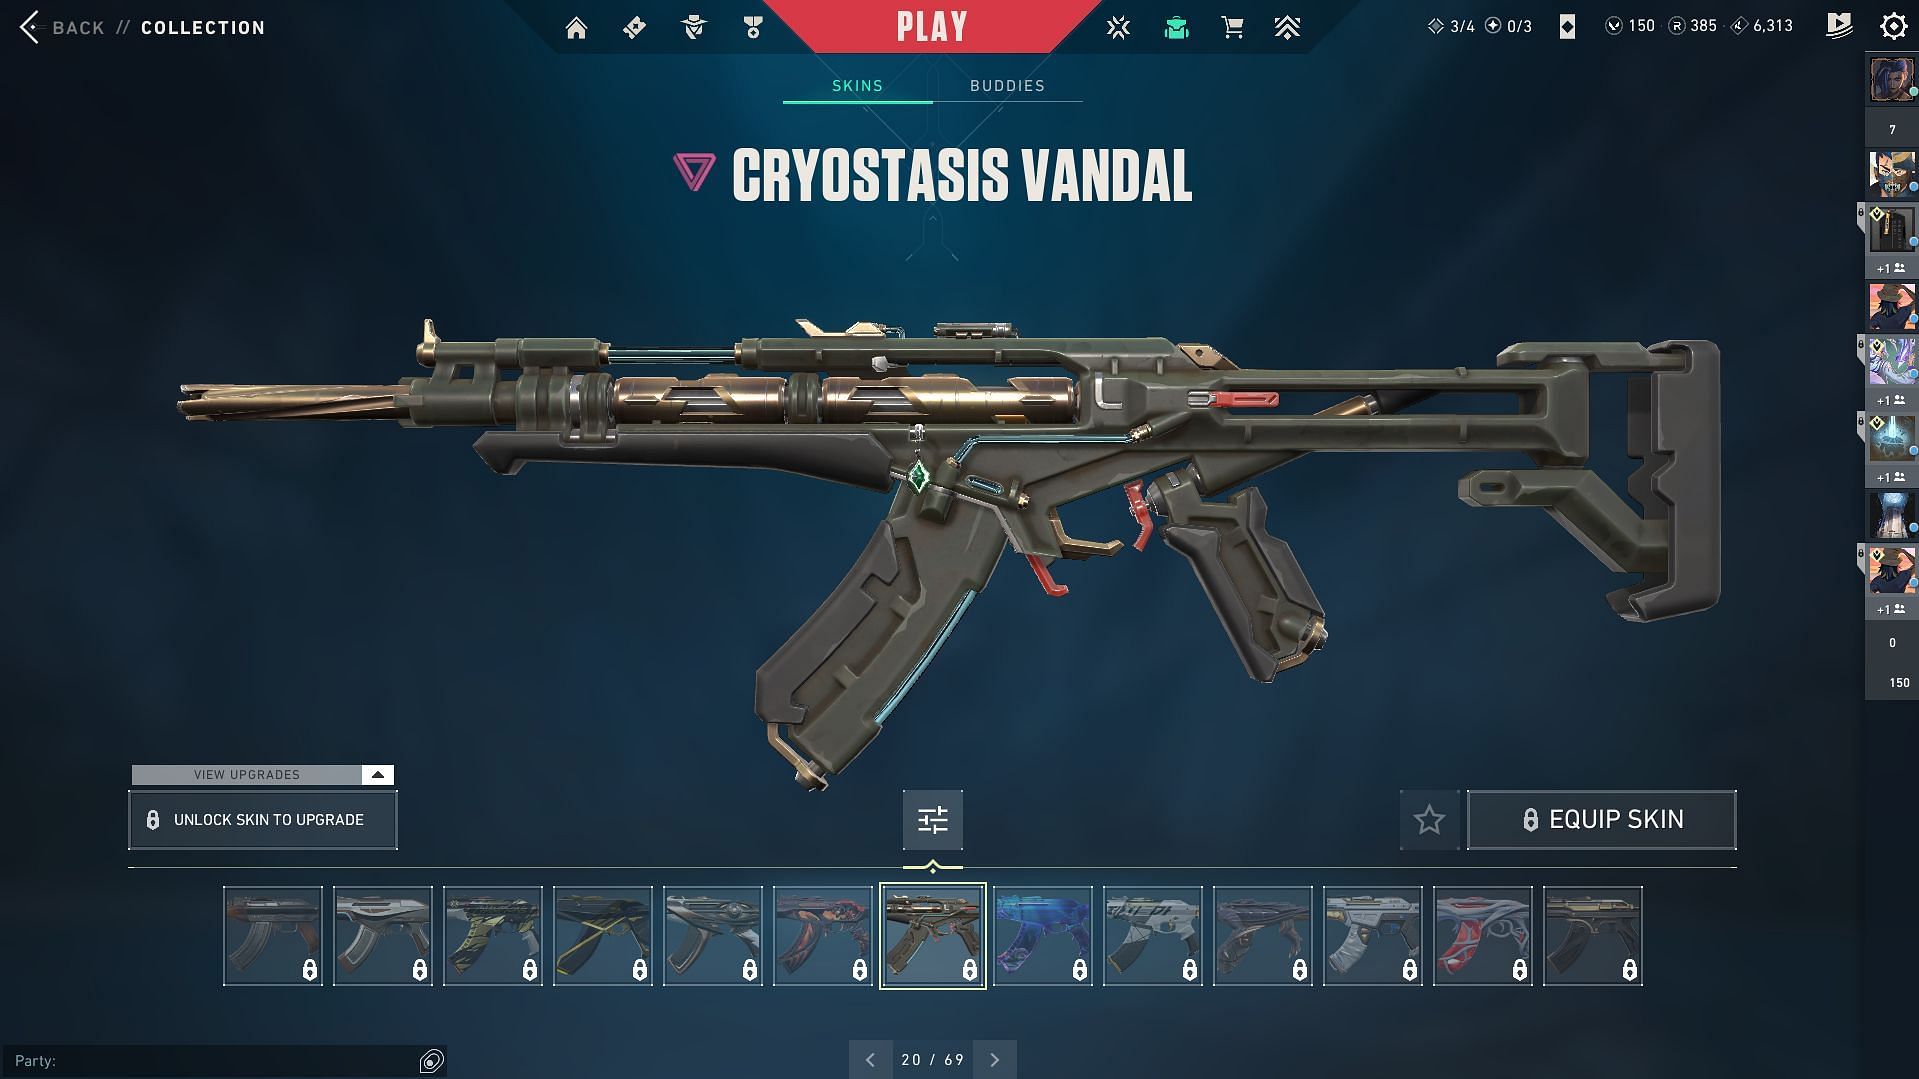 Cryostasis Vandal, one of the premium Vandal skins available in-game (Image via Riot Games)